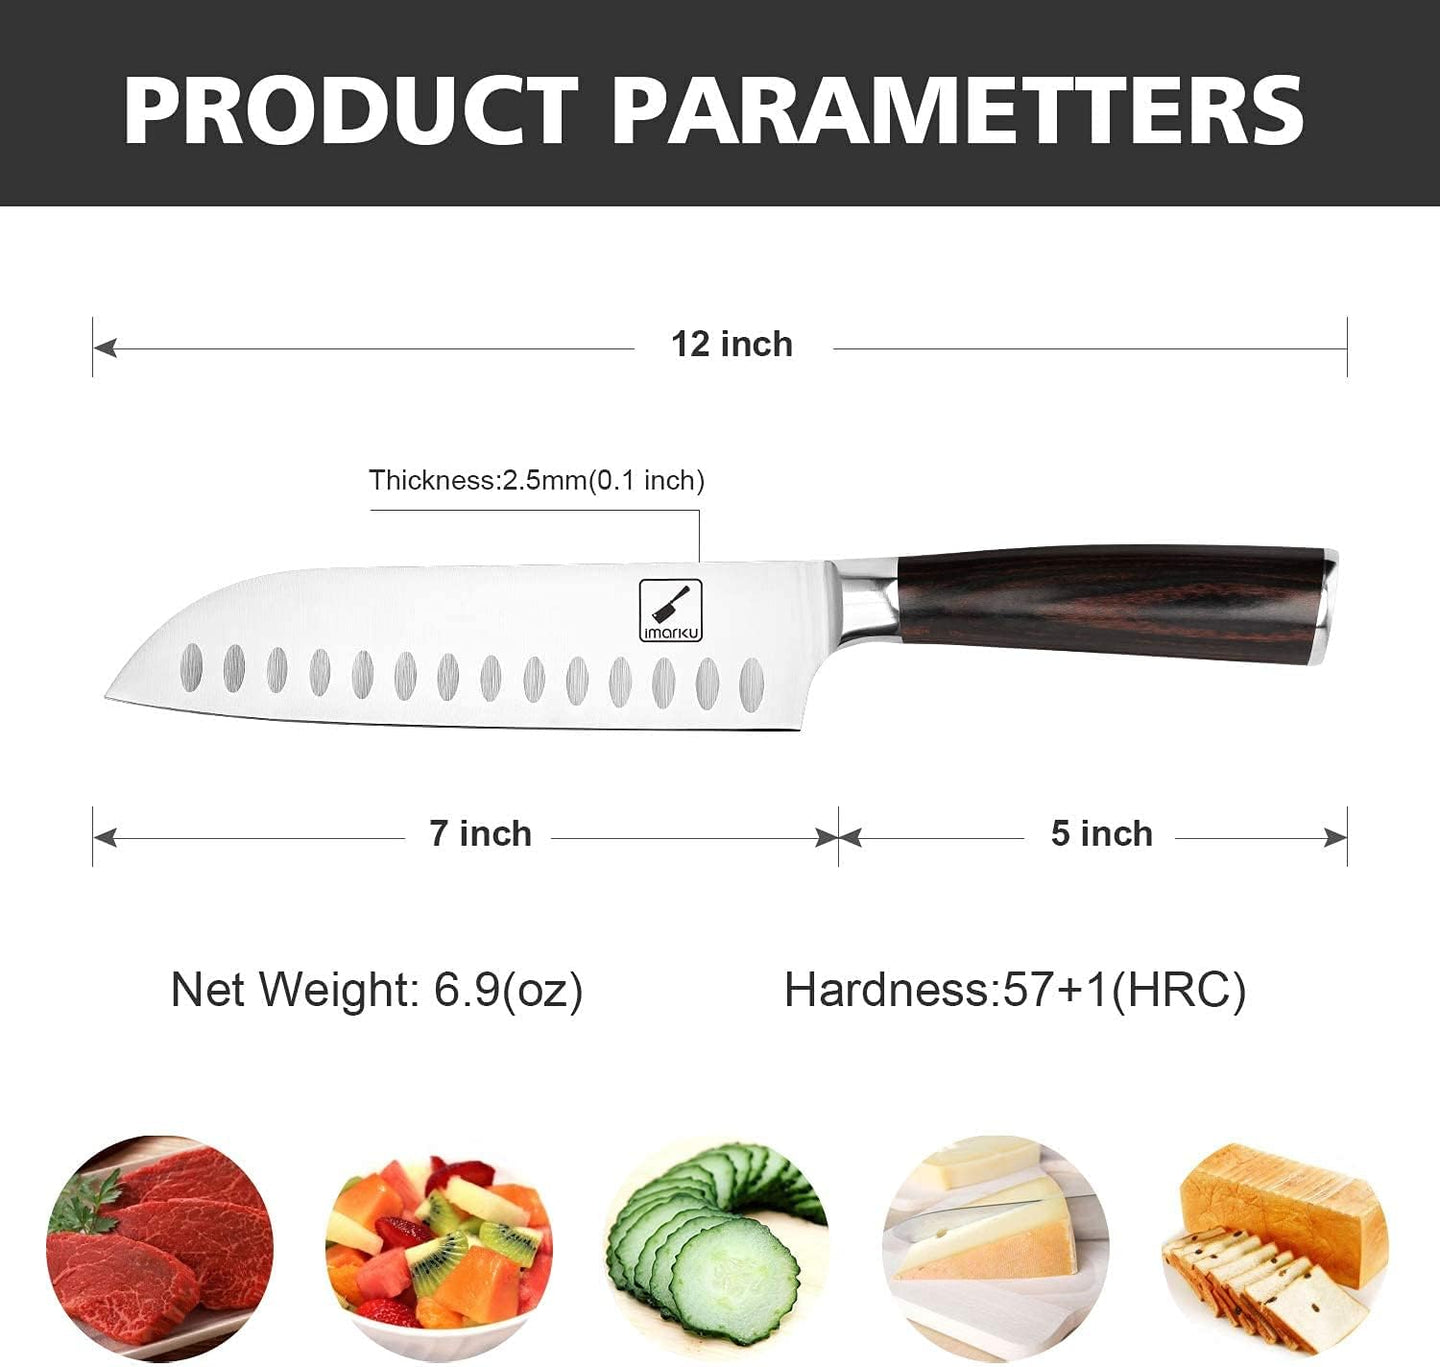 The Benefits Of Buying A Good Quality Chef's Knife - IMARKU